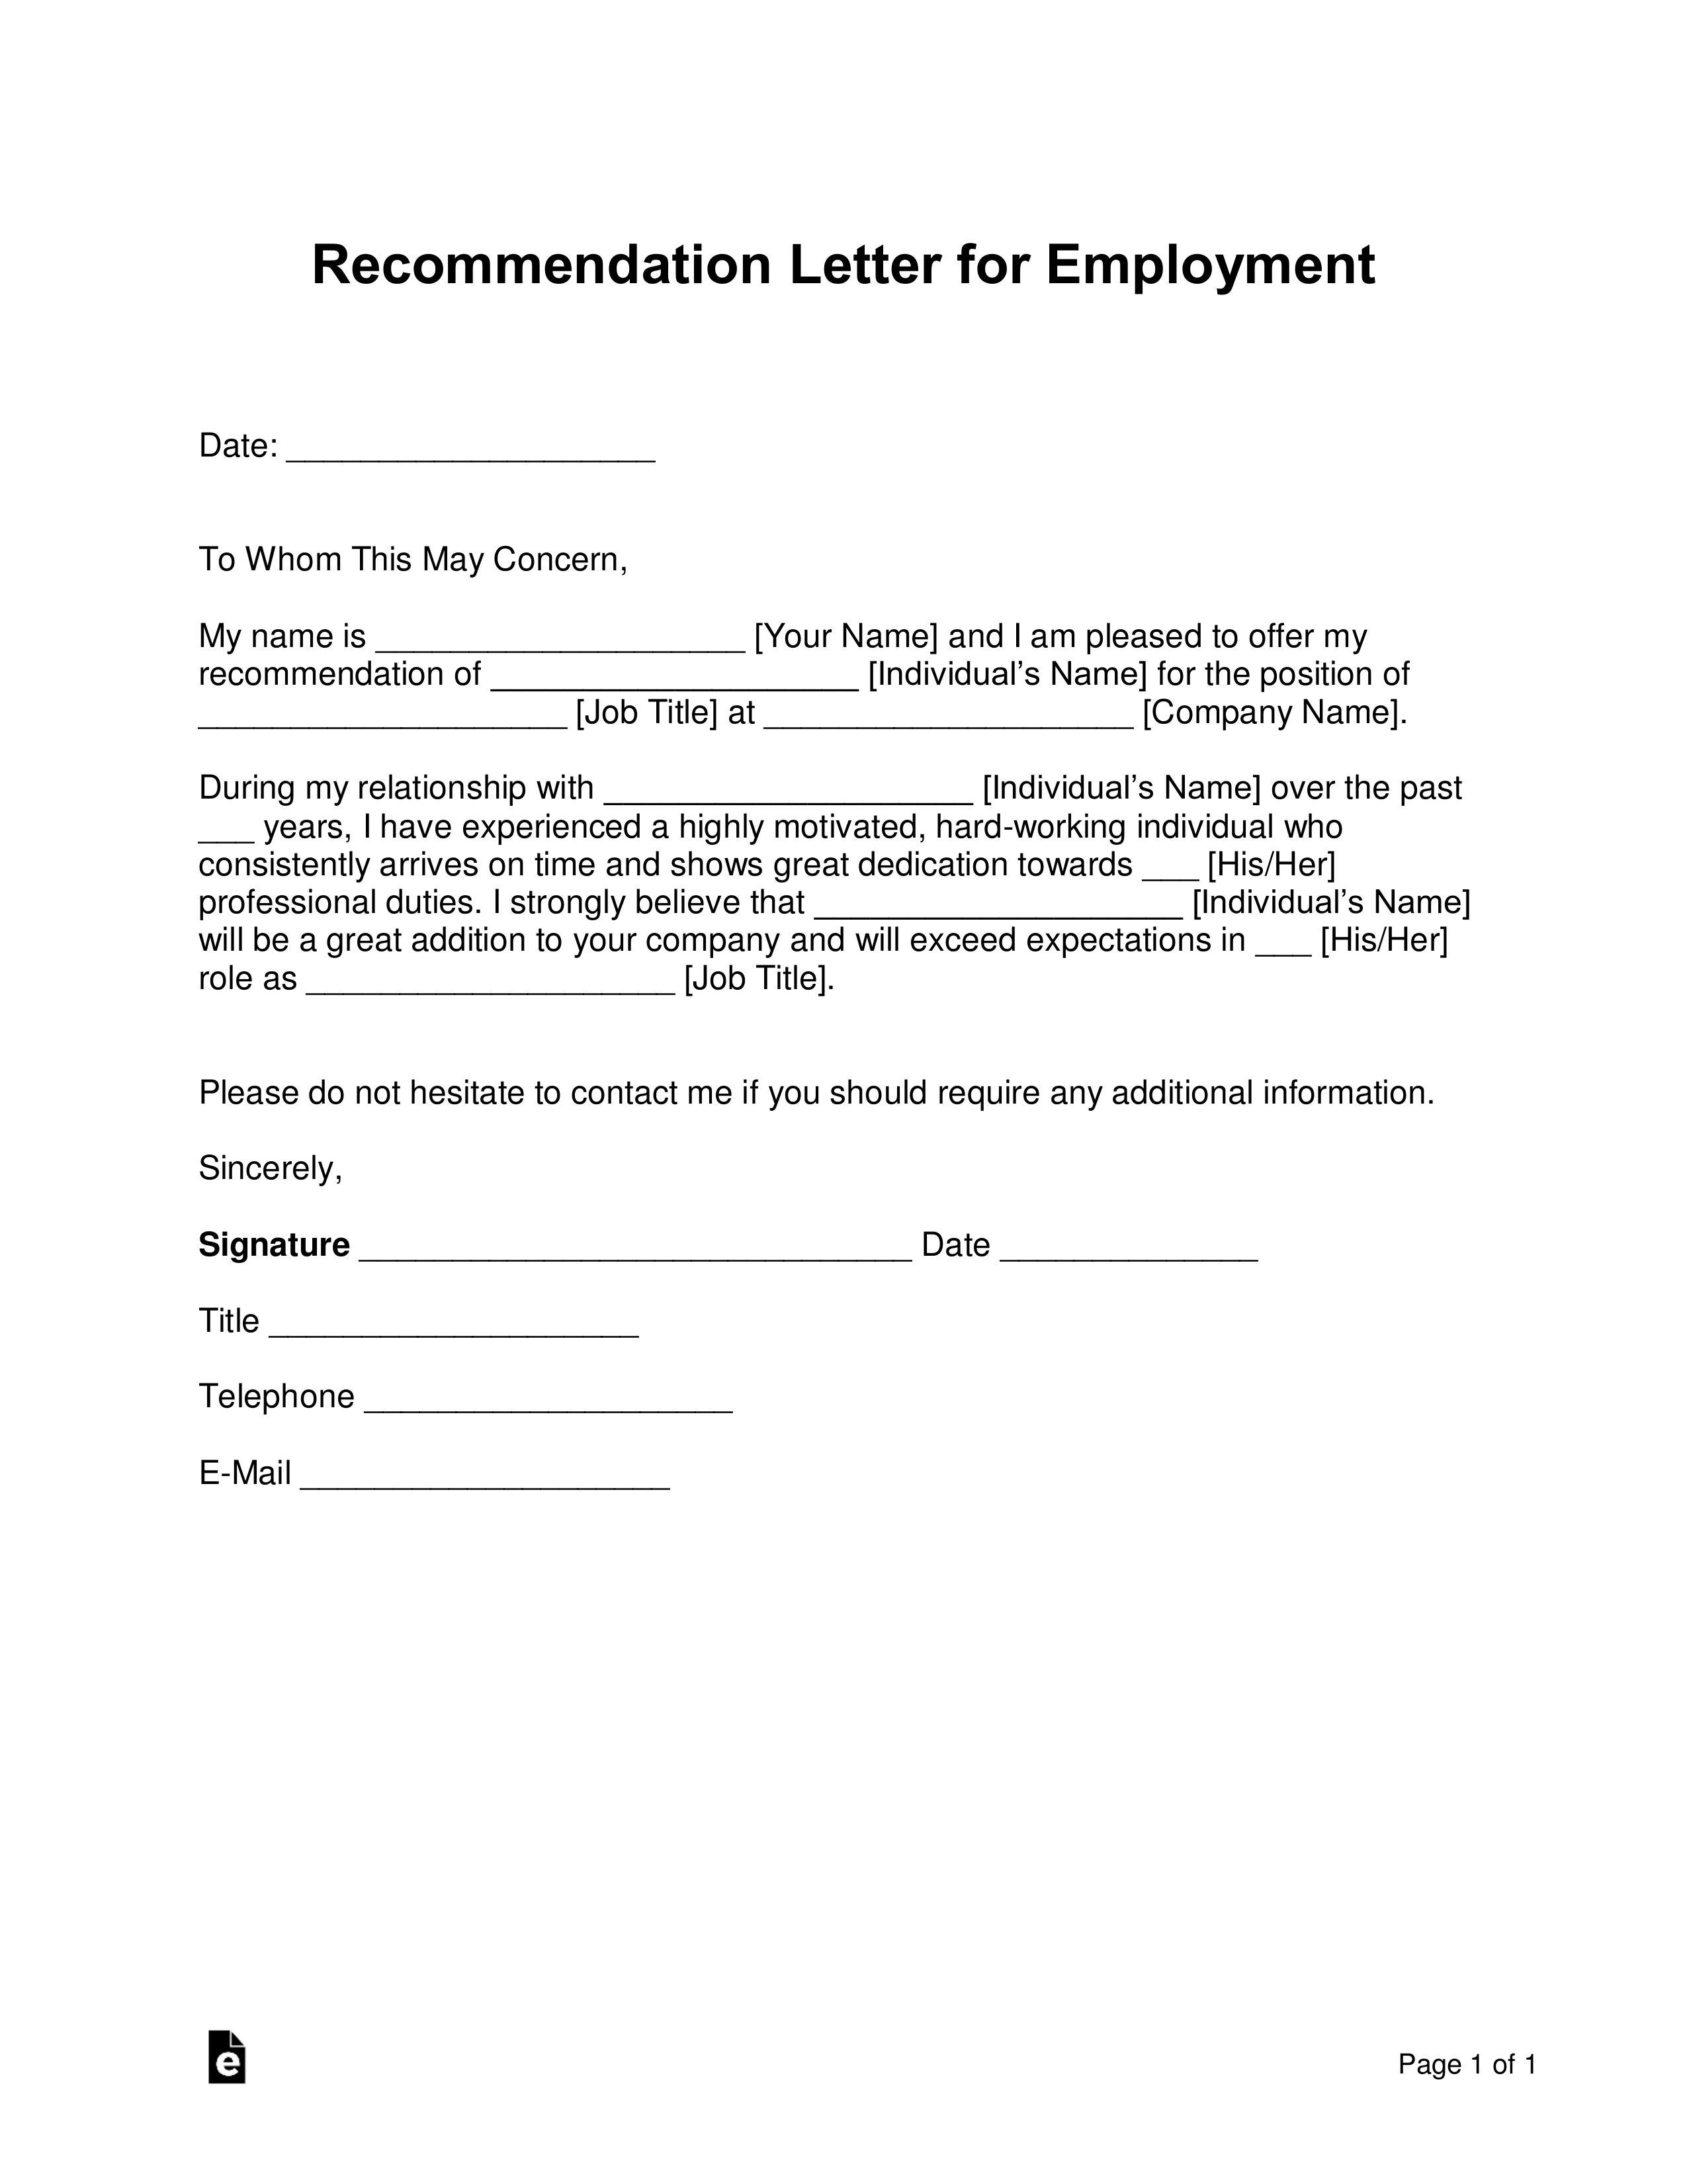 Letter Of Recommendation Employee Template from eforms.com